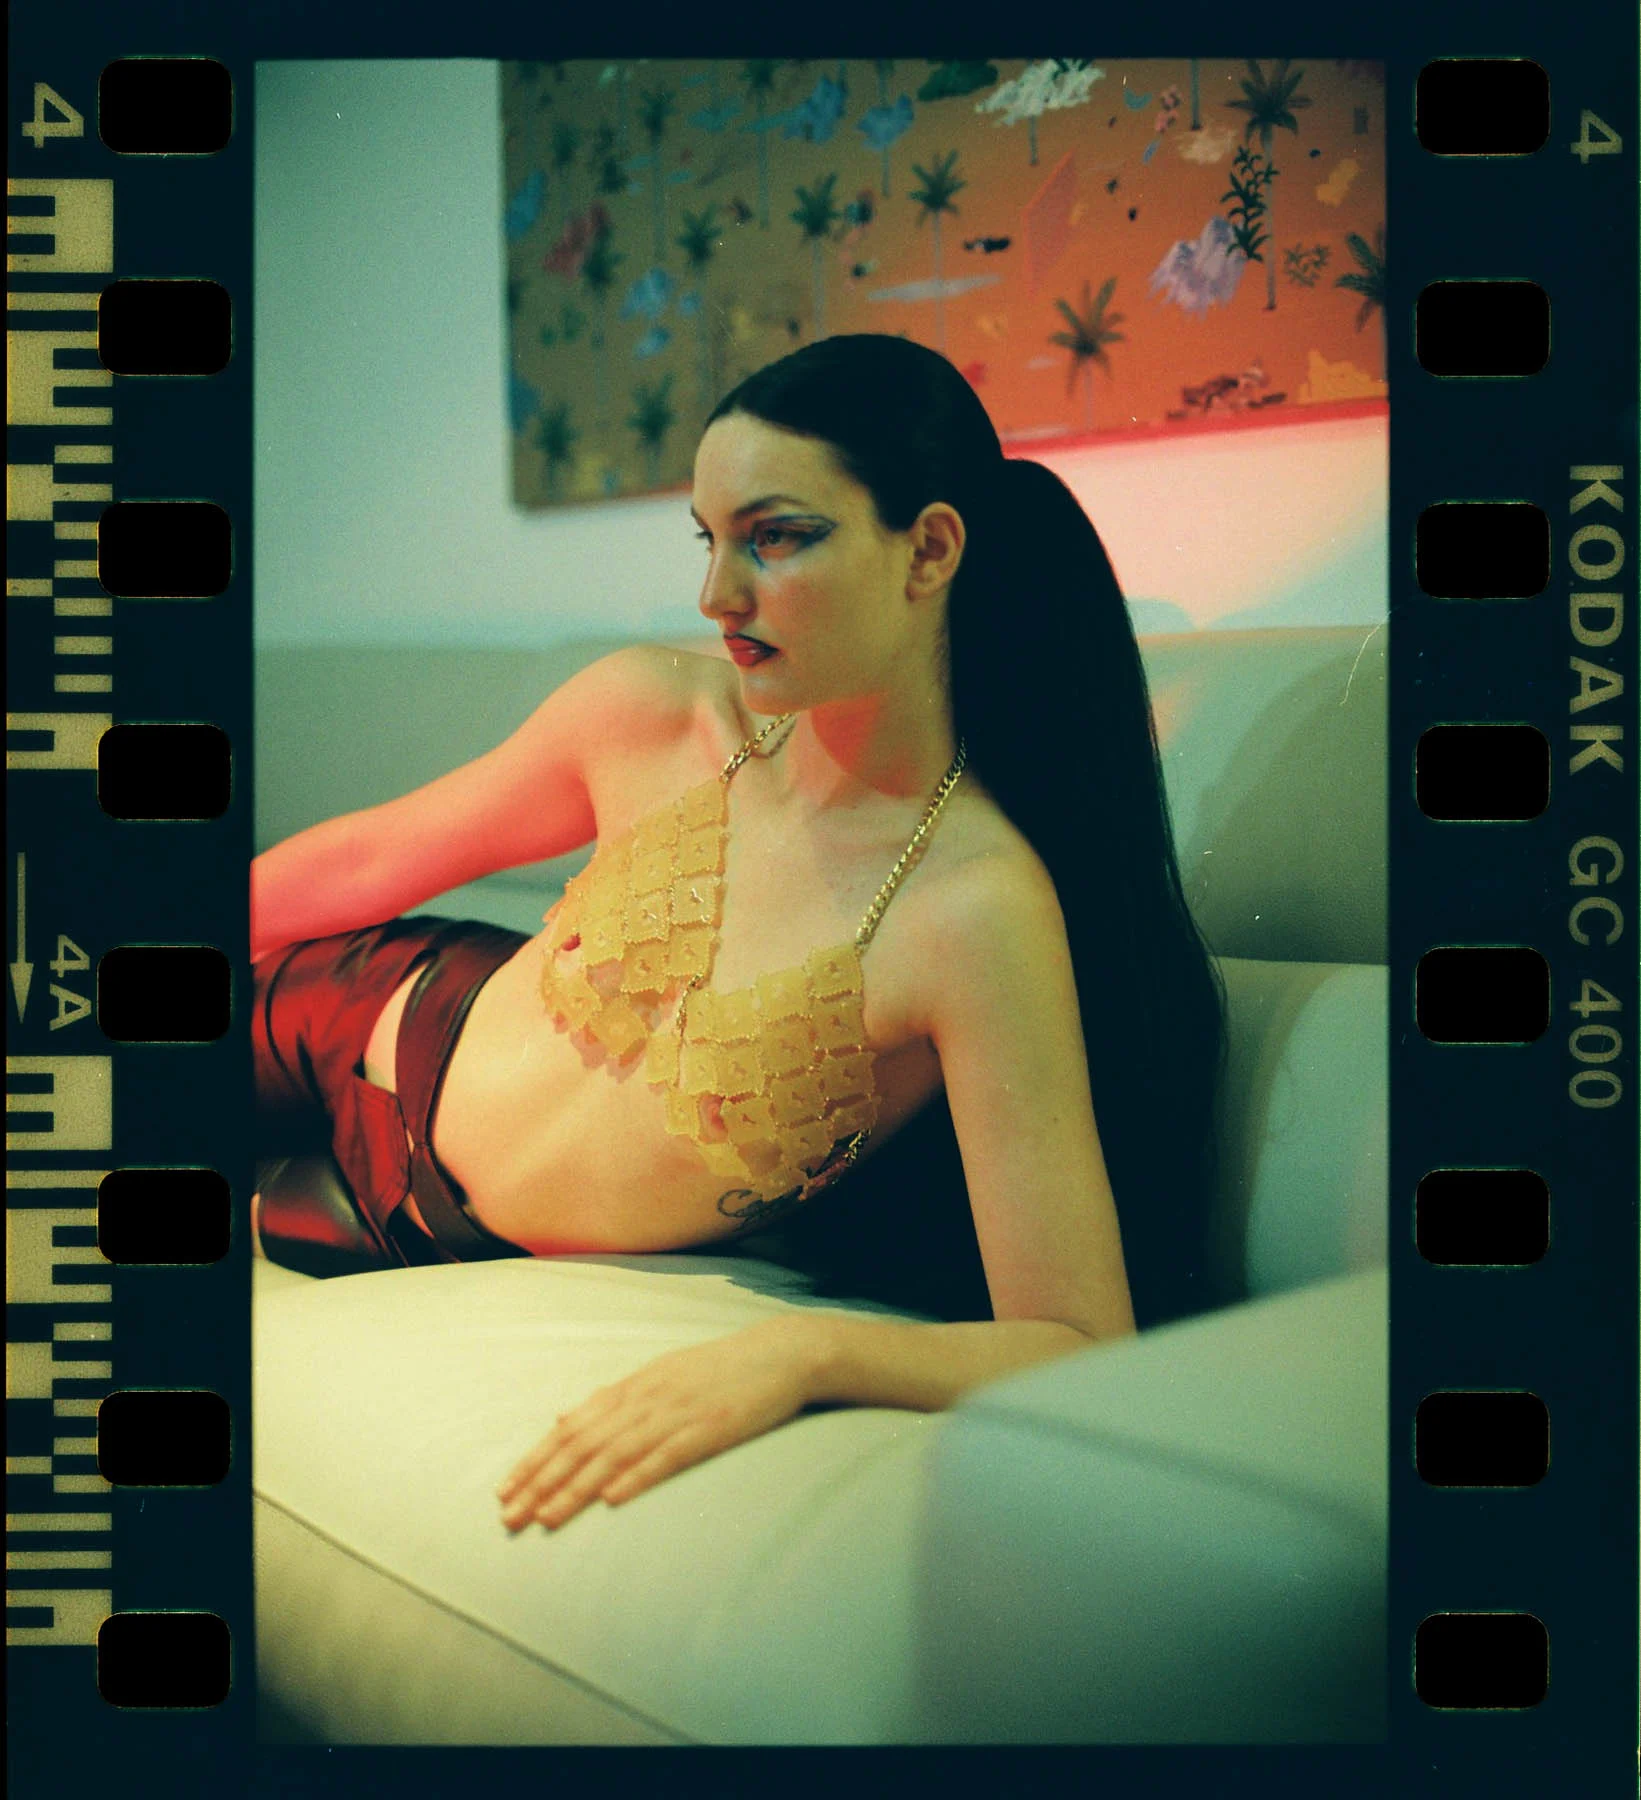 Argentinian model Carolina Vijande reclines on a couch, elegantly supporting her body with her left arm. Her long black hair is tied in a ponytail. A red light illuminates parts of her figure. The background features vibrant geometric shapes and curves.